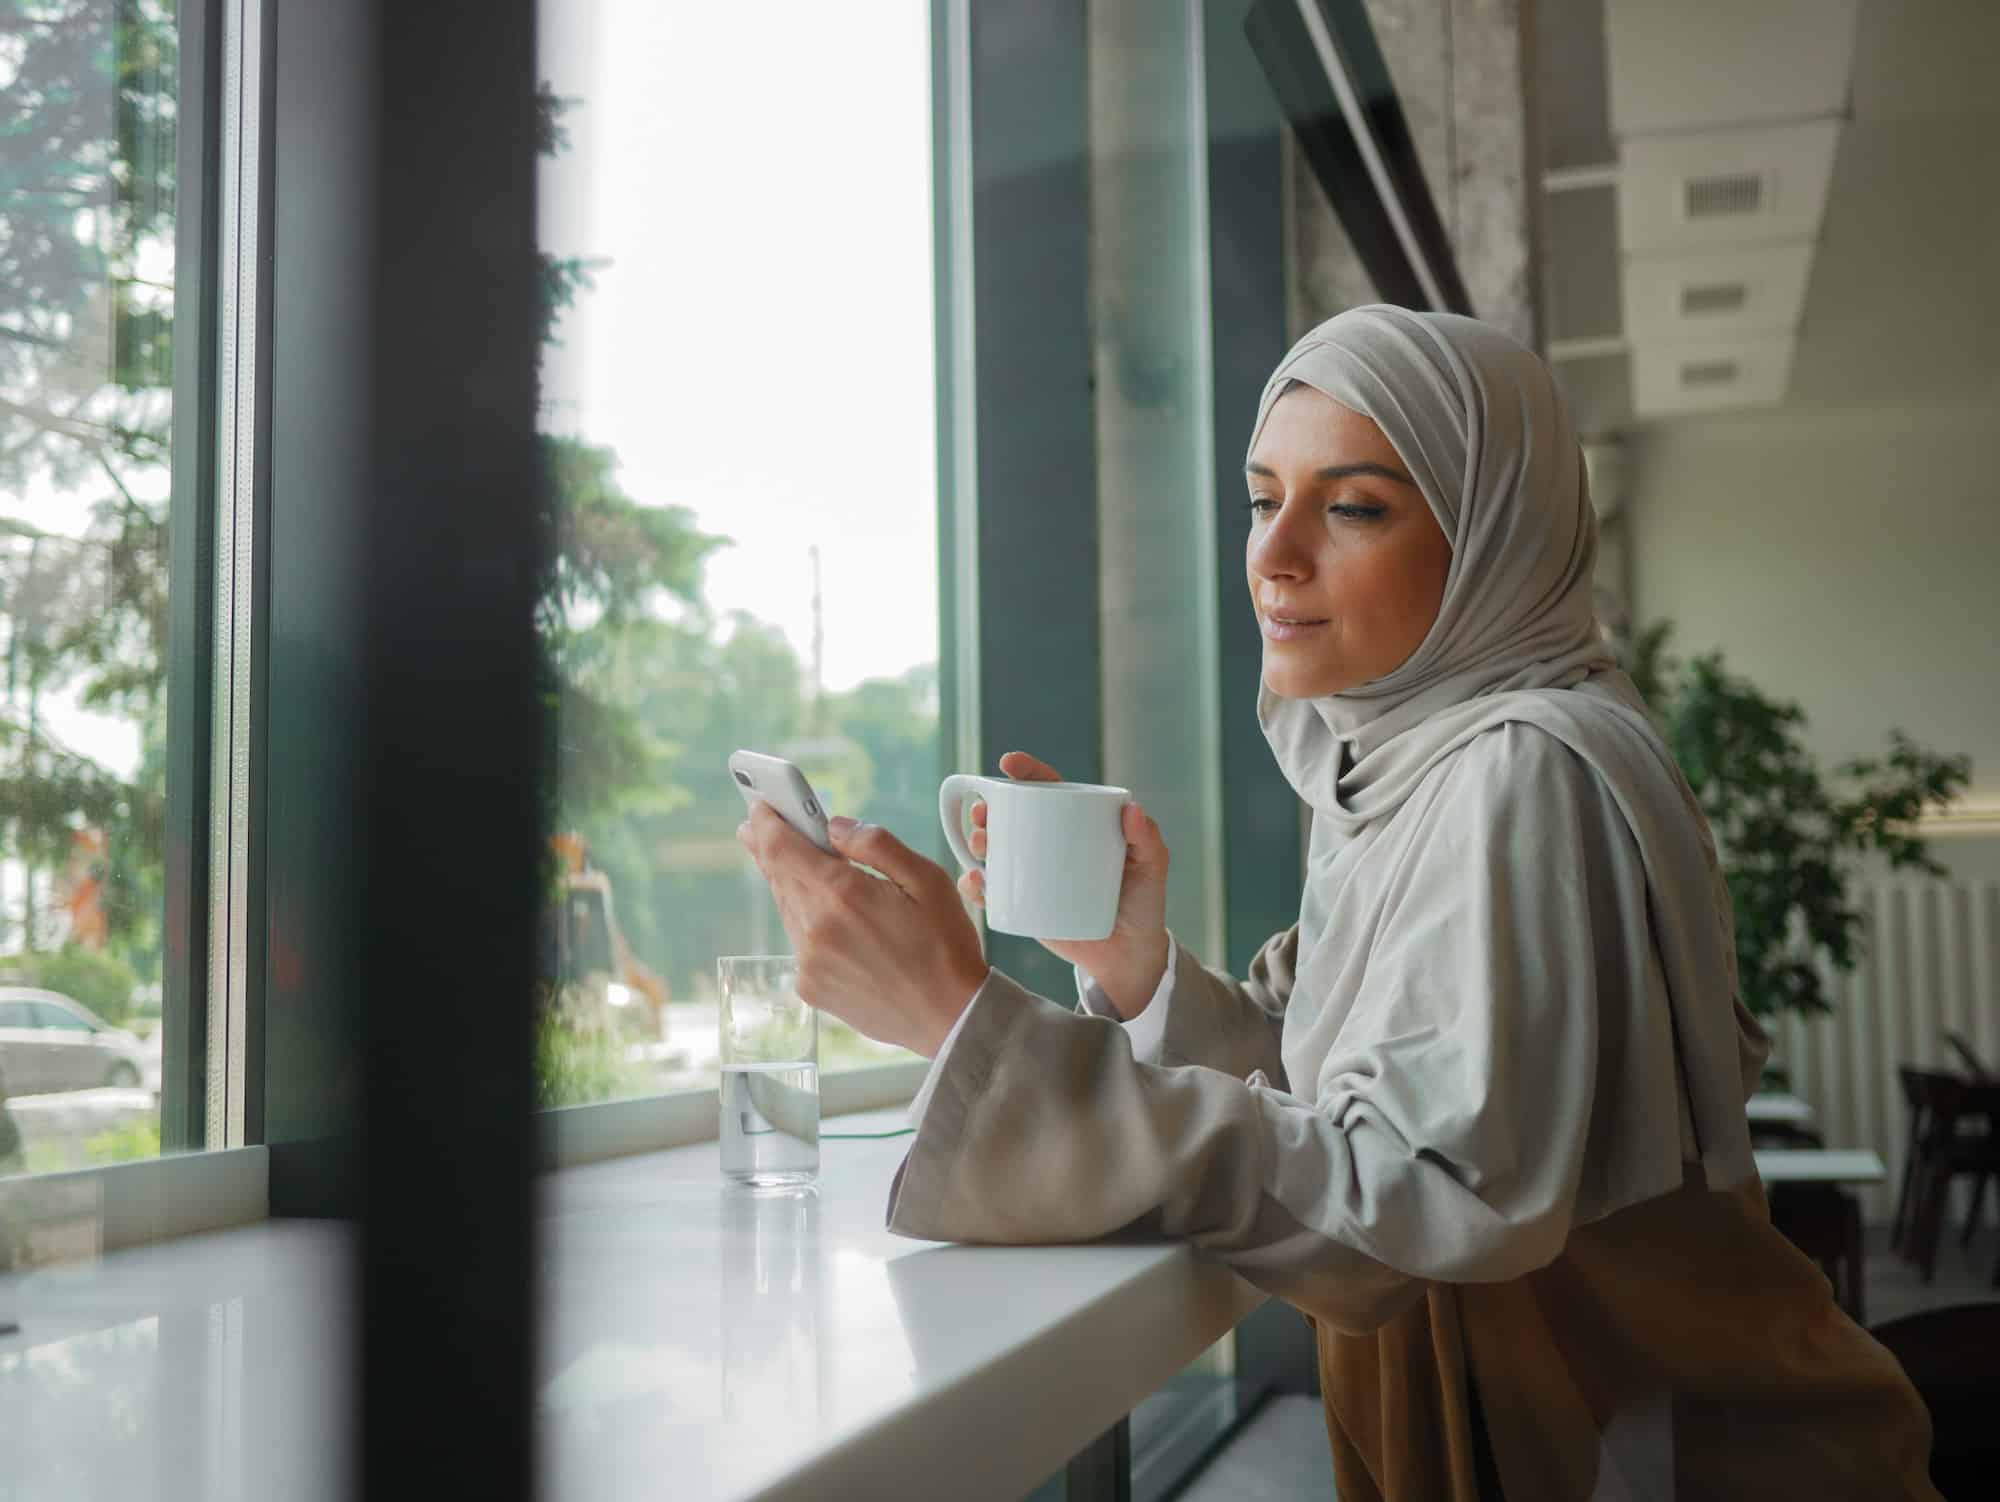 muslim woman on remote working online education or video conversation in caffe